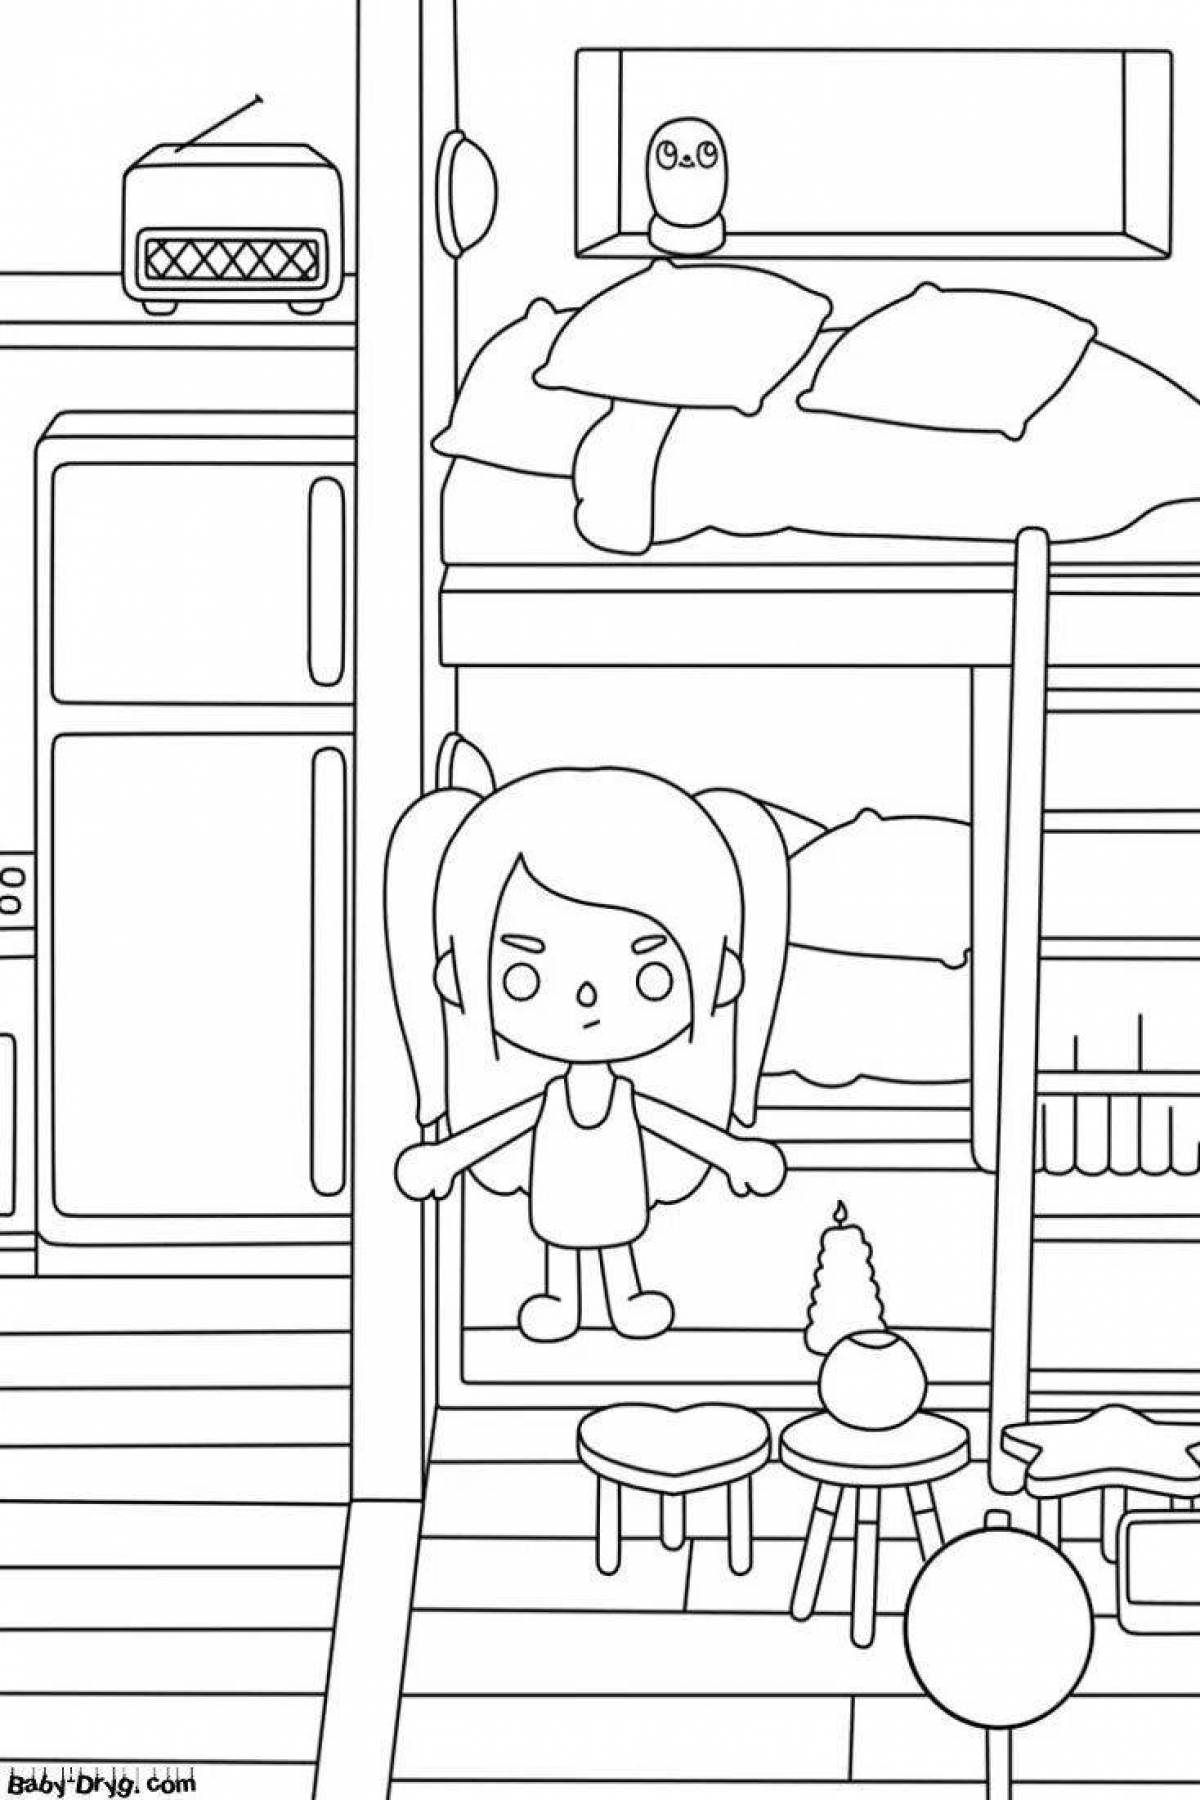 Grand white current side coloring page